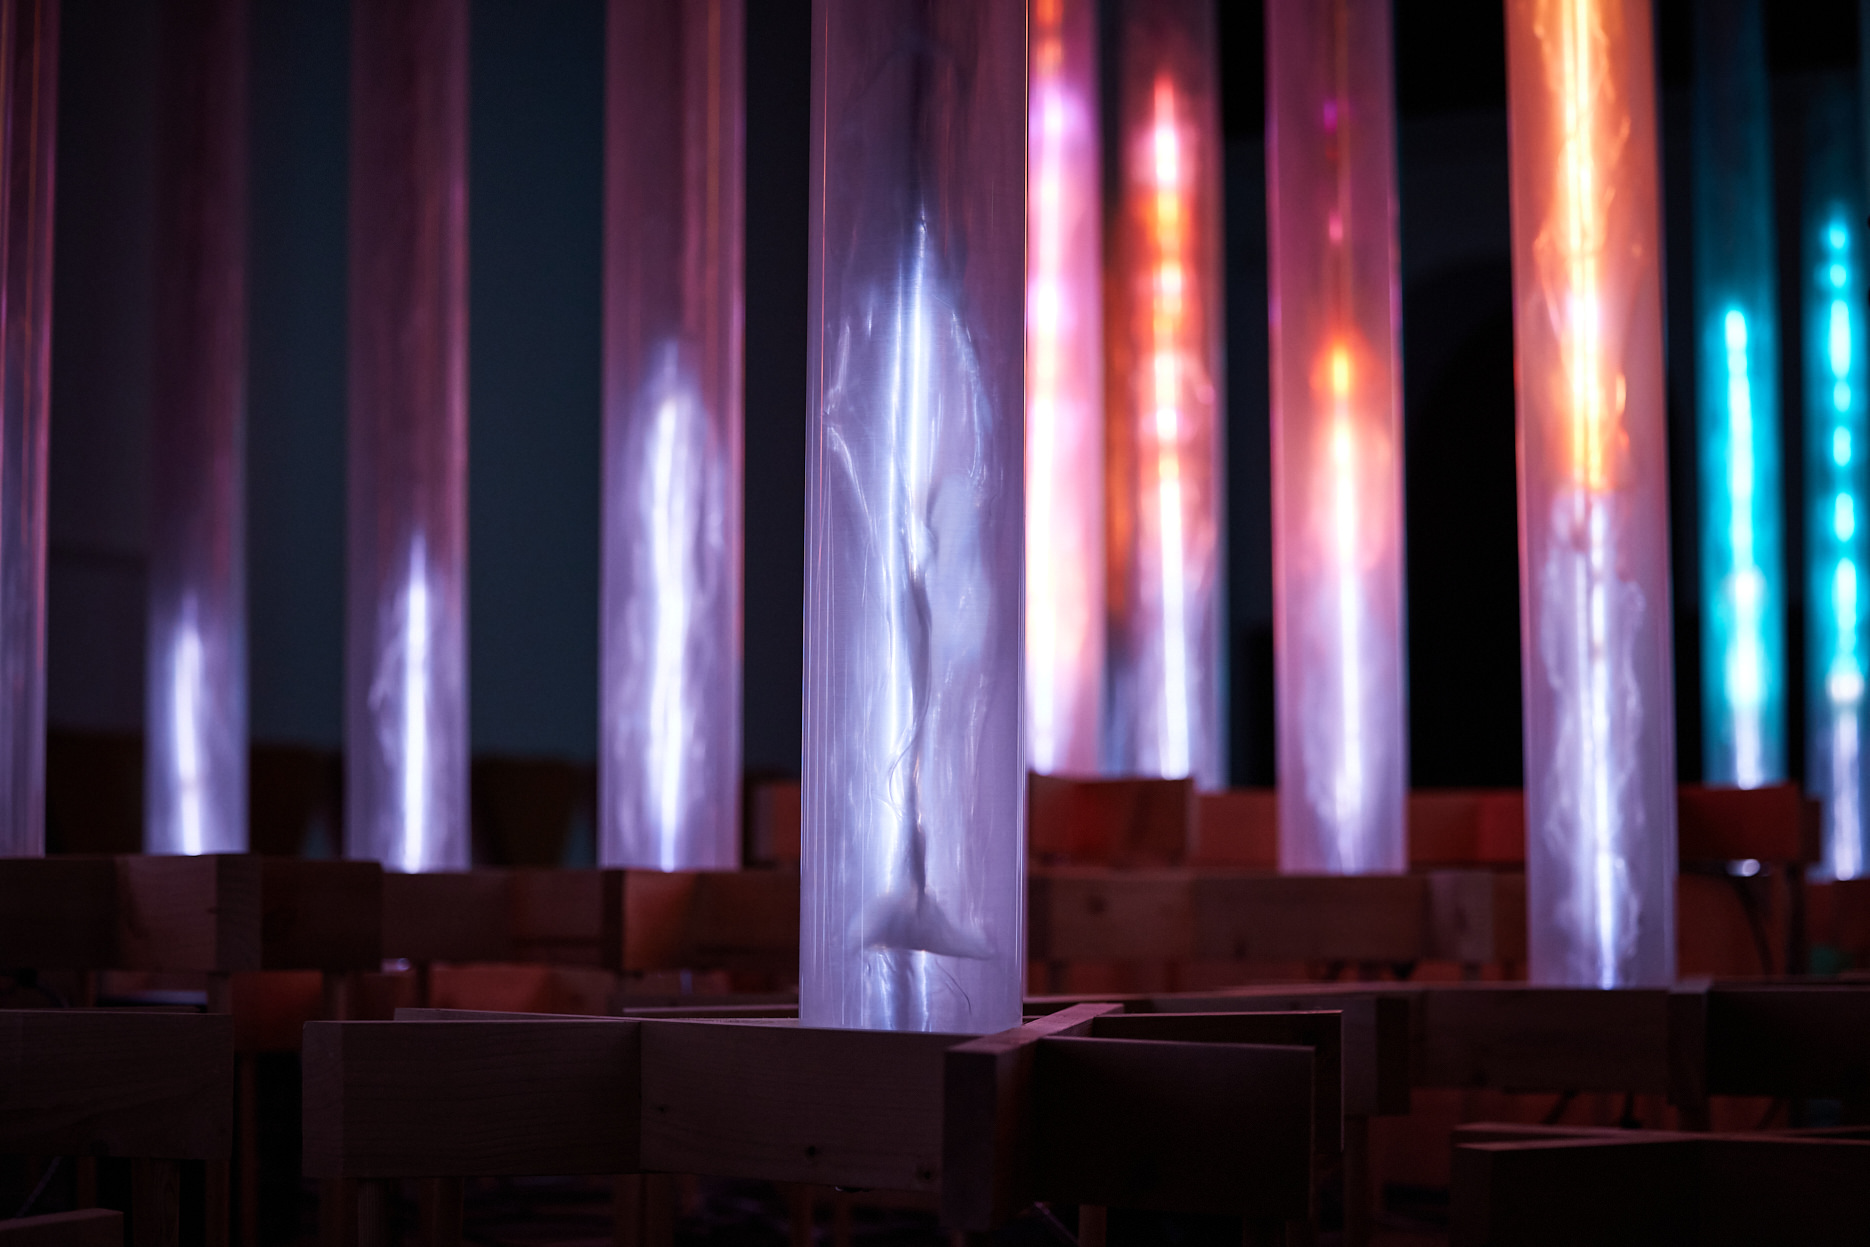 An installation of pink and blue glowing columns.